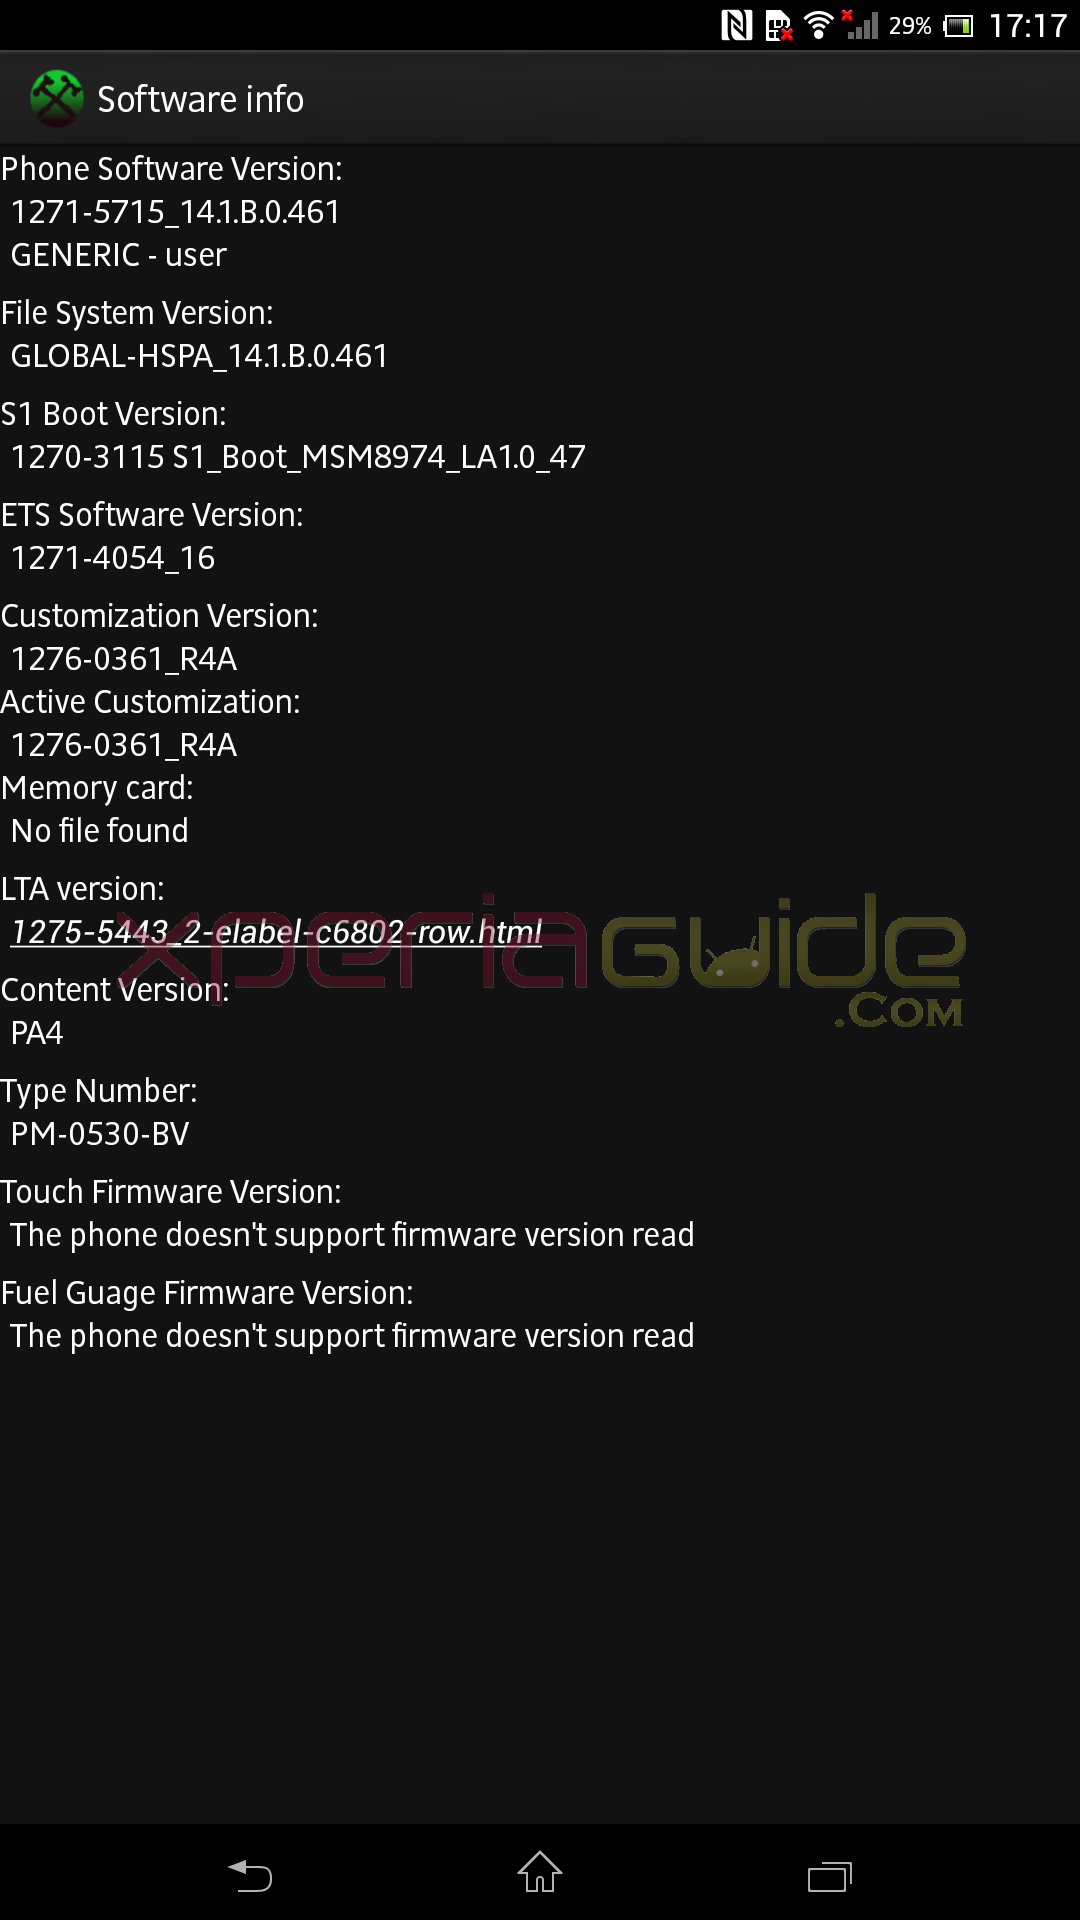 Software info of Xperia Z Ultra C6802 Android 4.2.2 14.1.B.0.461 firmware